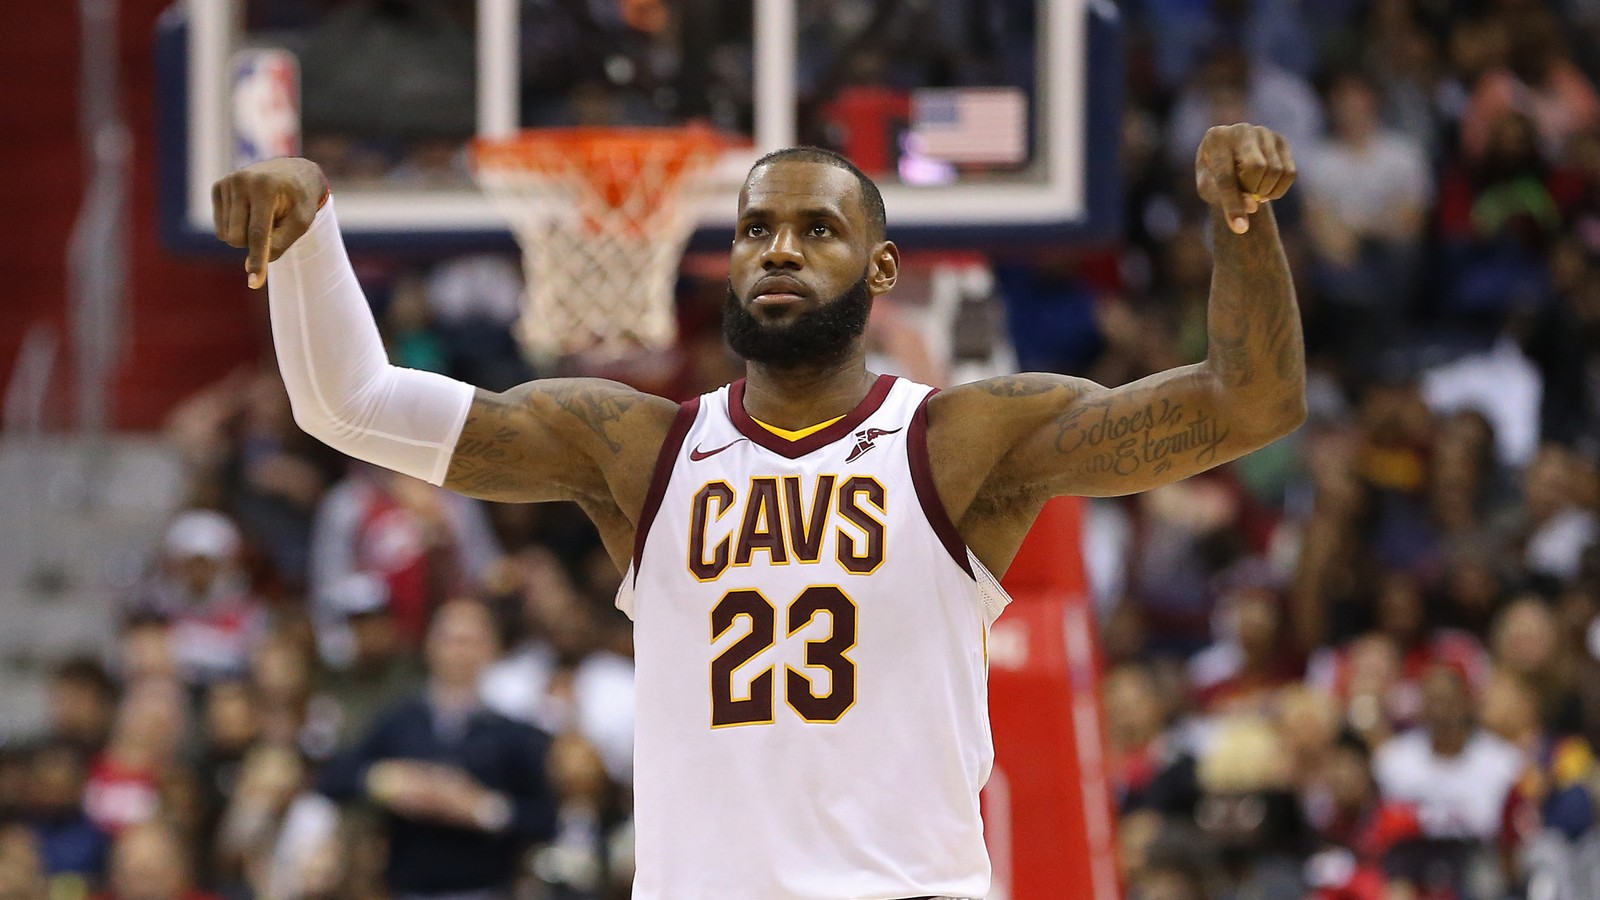 LeBron James is already among the NBA's best at age 20 - Sports